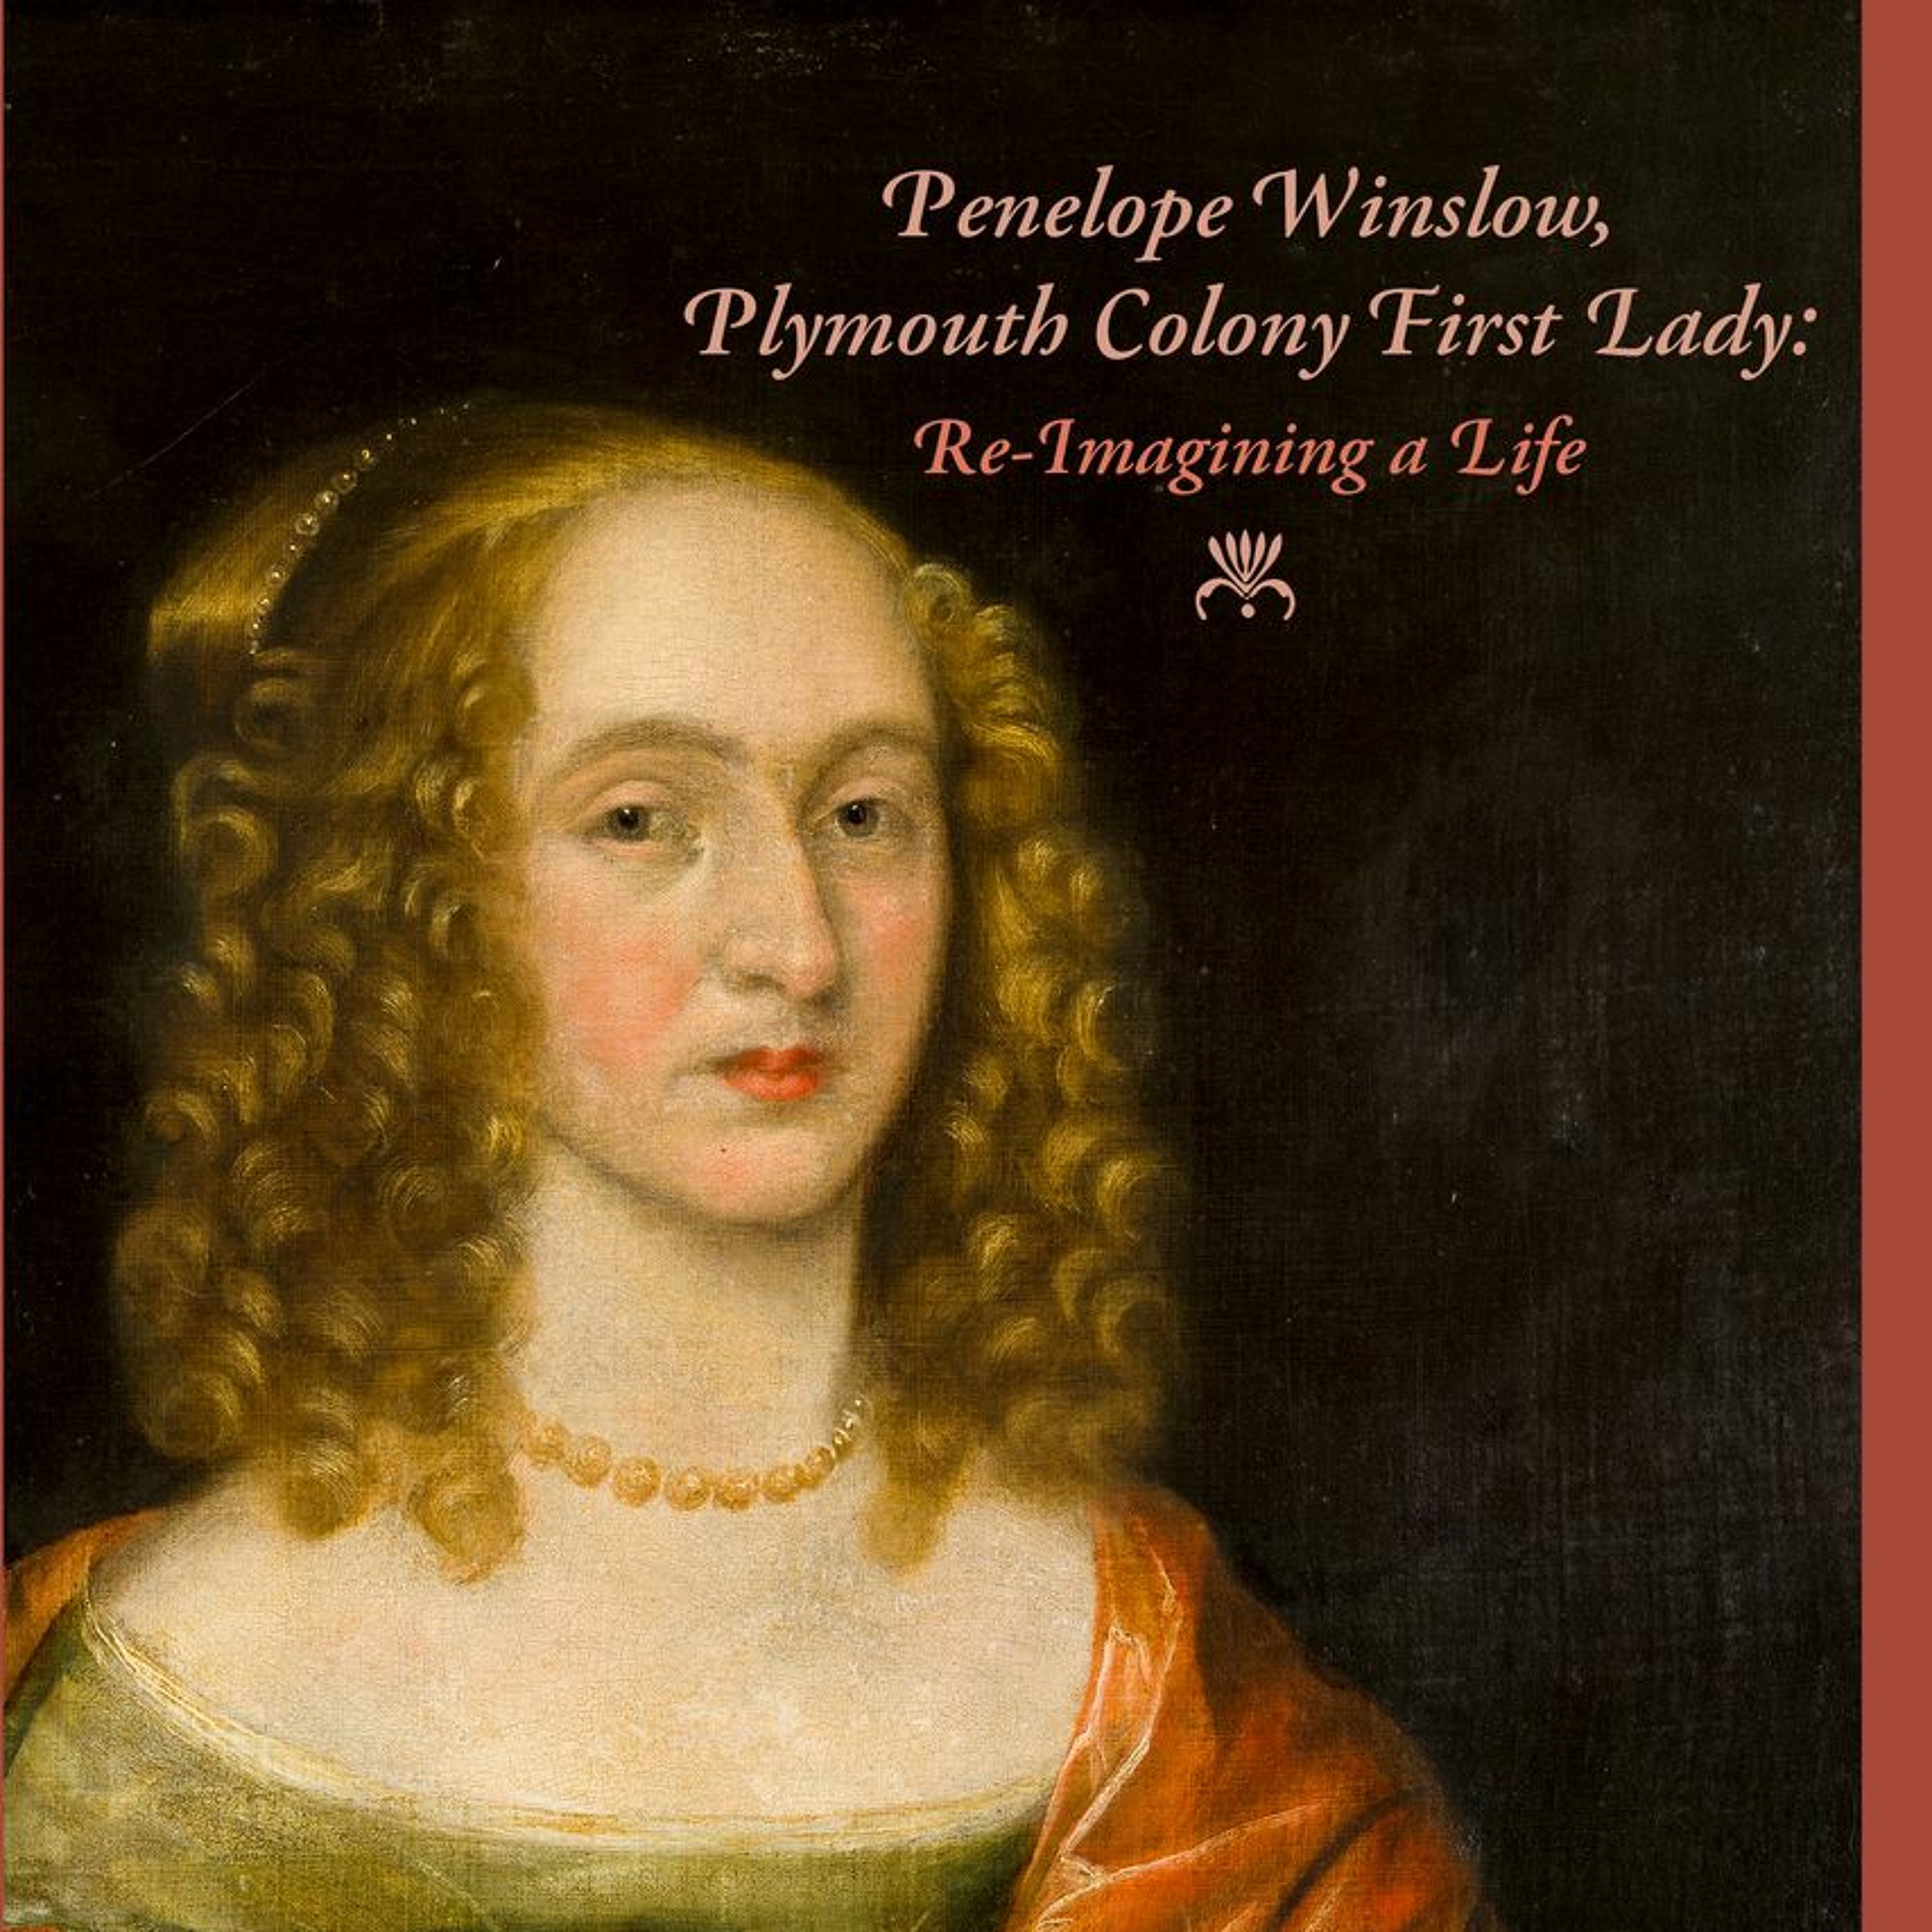 Michelle Marchetti Coughlin, “Plymouth Colony First Lady Penelope Winslow”